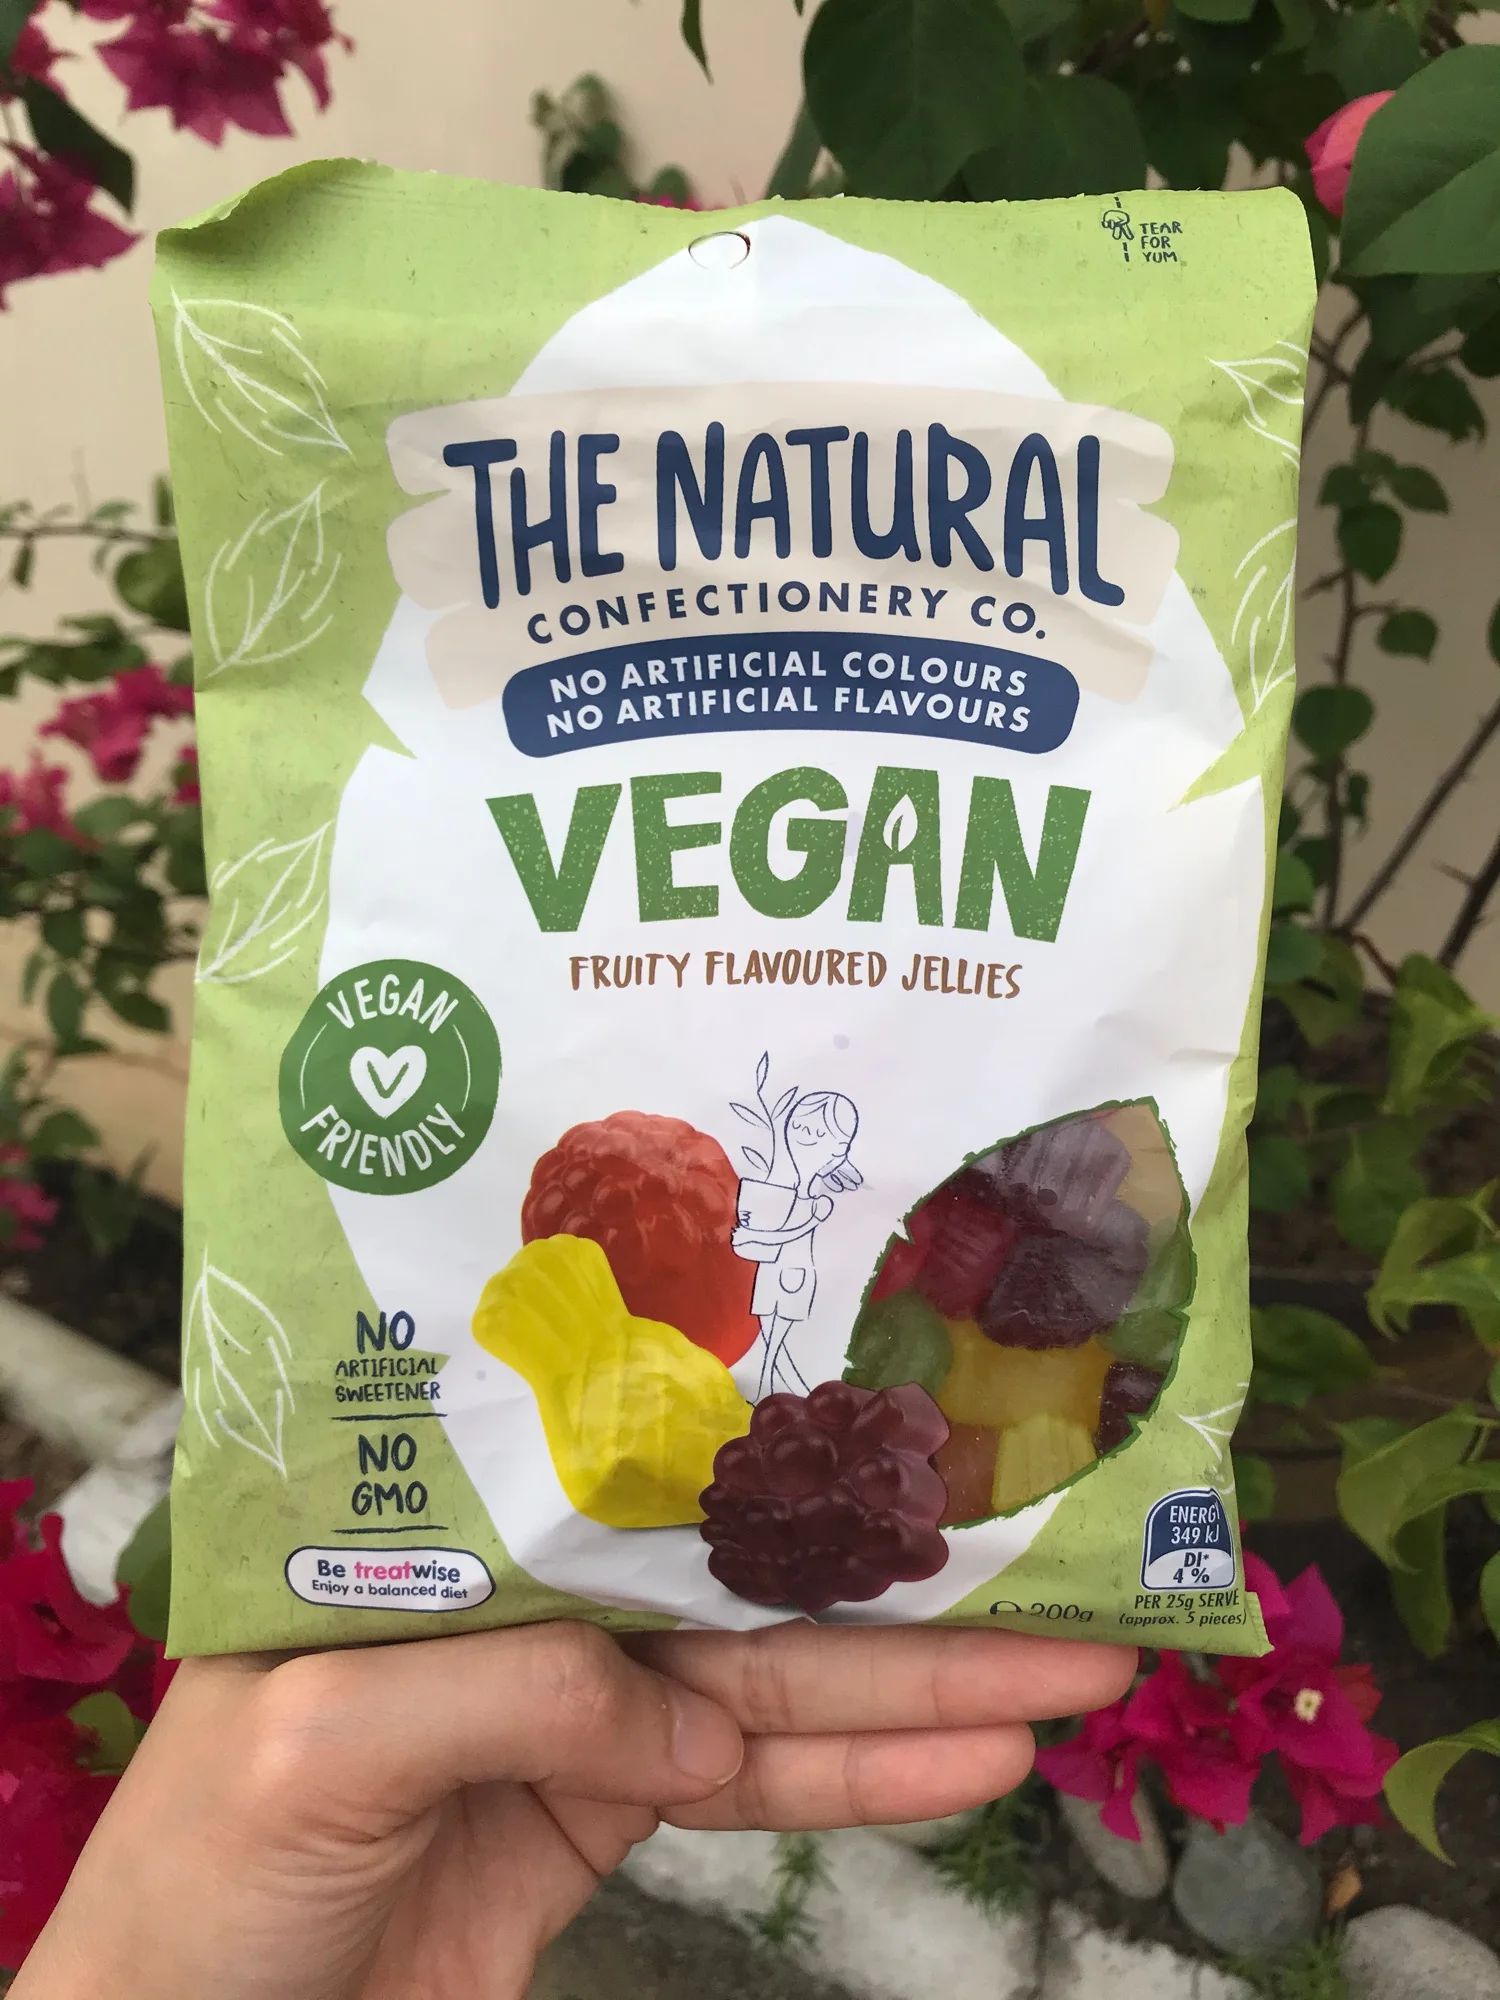 The Natural Confectionery Co. - Vegan Fruity Flavoured Jellies - Vegan Friendly - No artificial colours/flovours